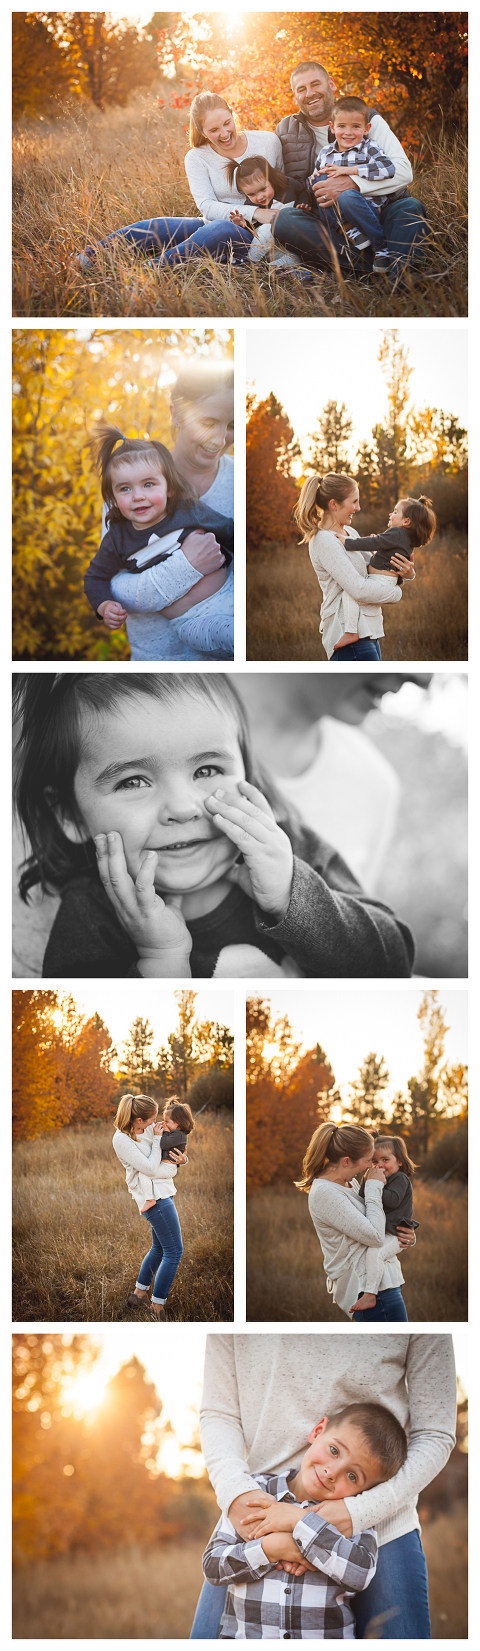 Allemand Lifestyle Family Session by Hailey Haberman Photography in Ellensburg WA